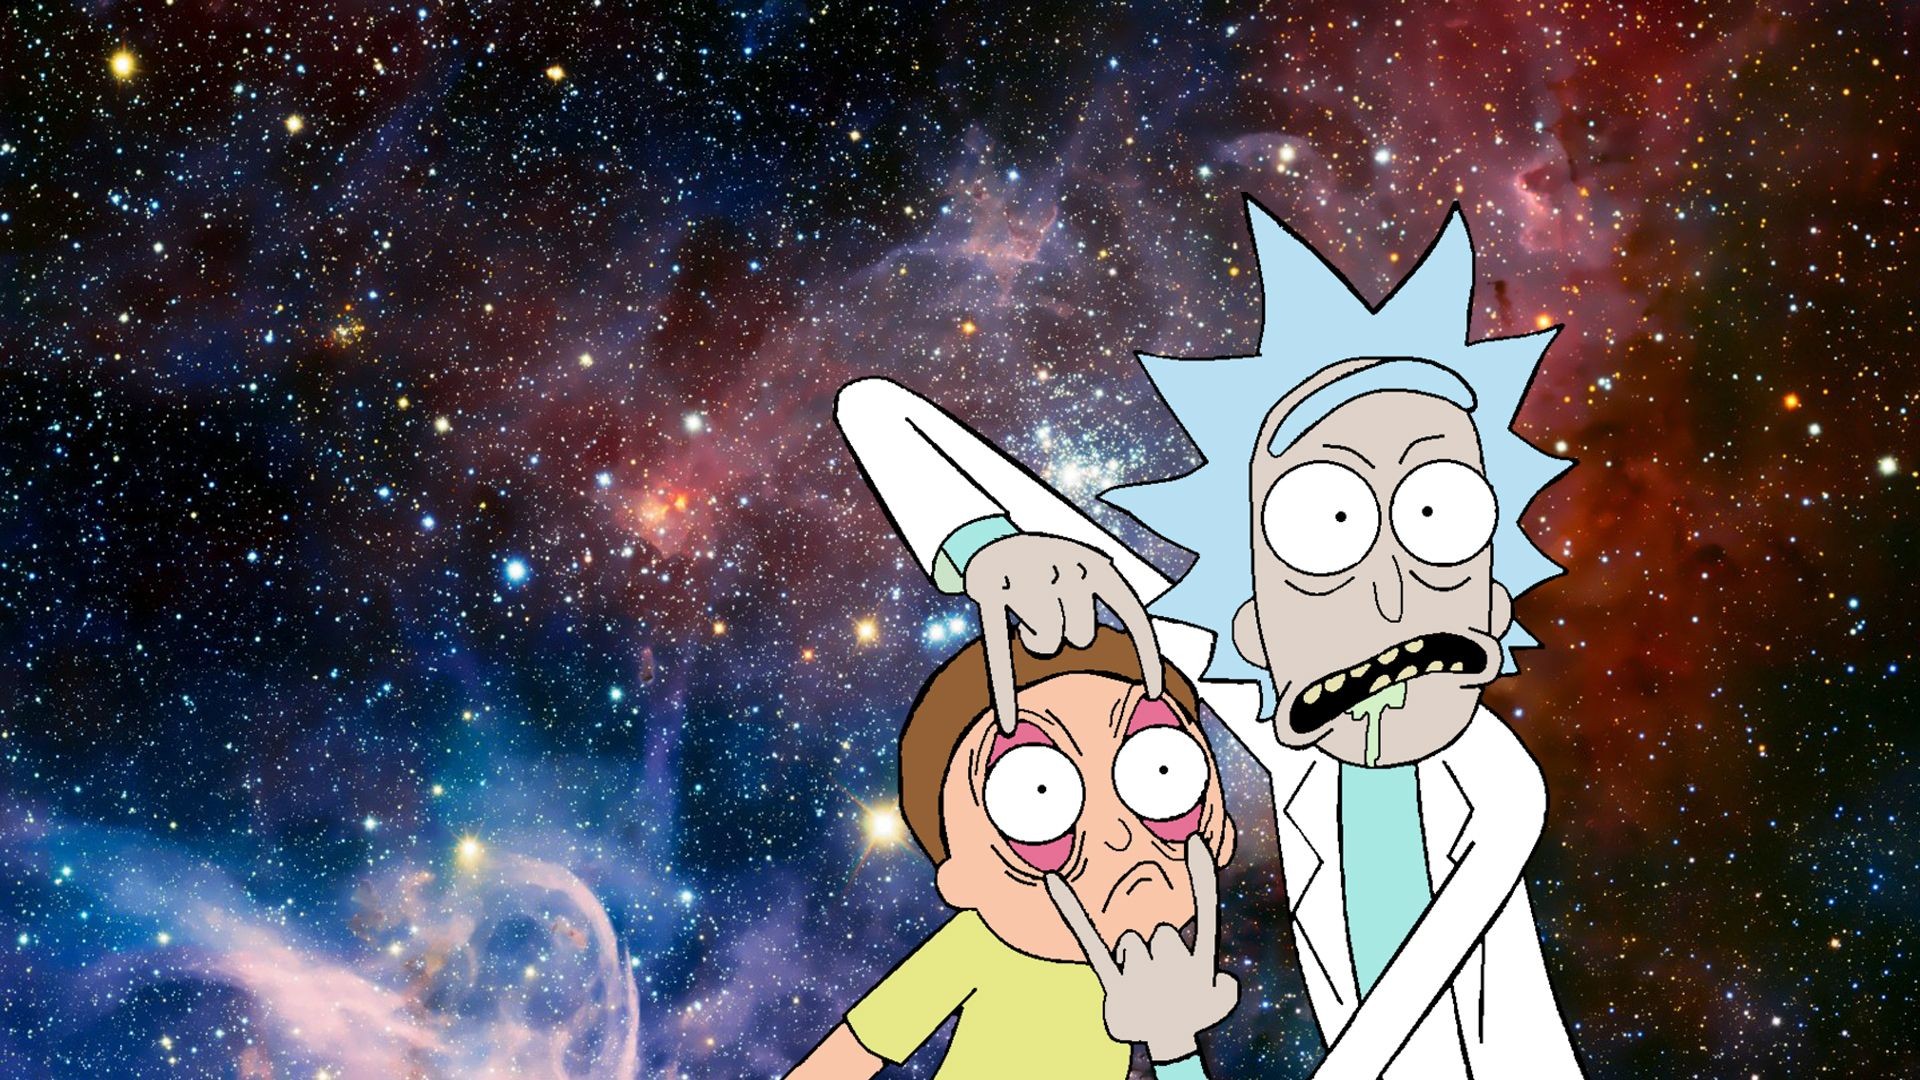 General 1920x1080 Rick and Morty fan art humor Rick Sanchez Morty Smith space TV series cartoon